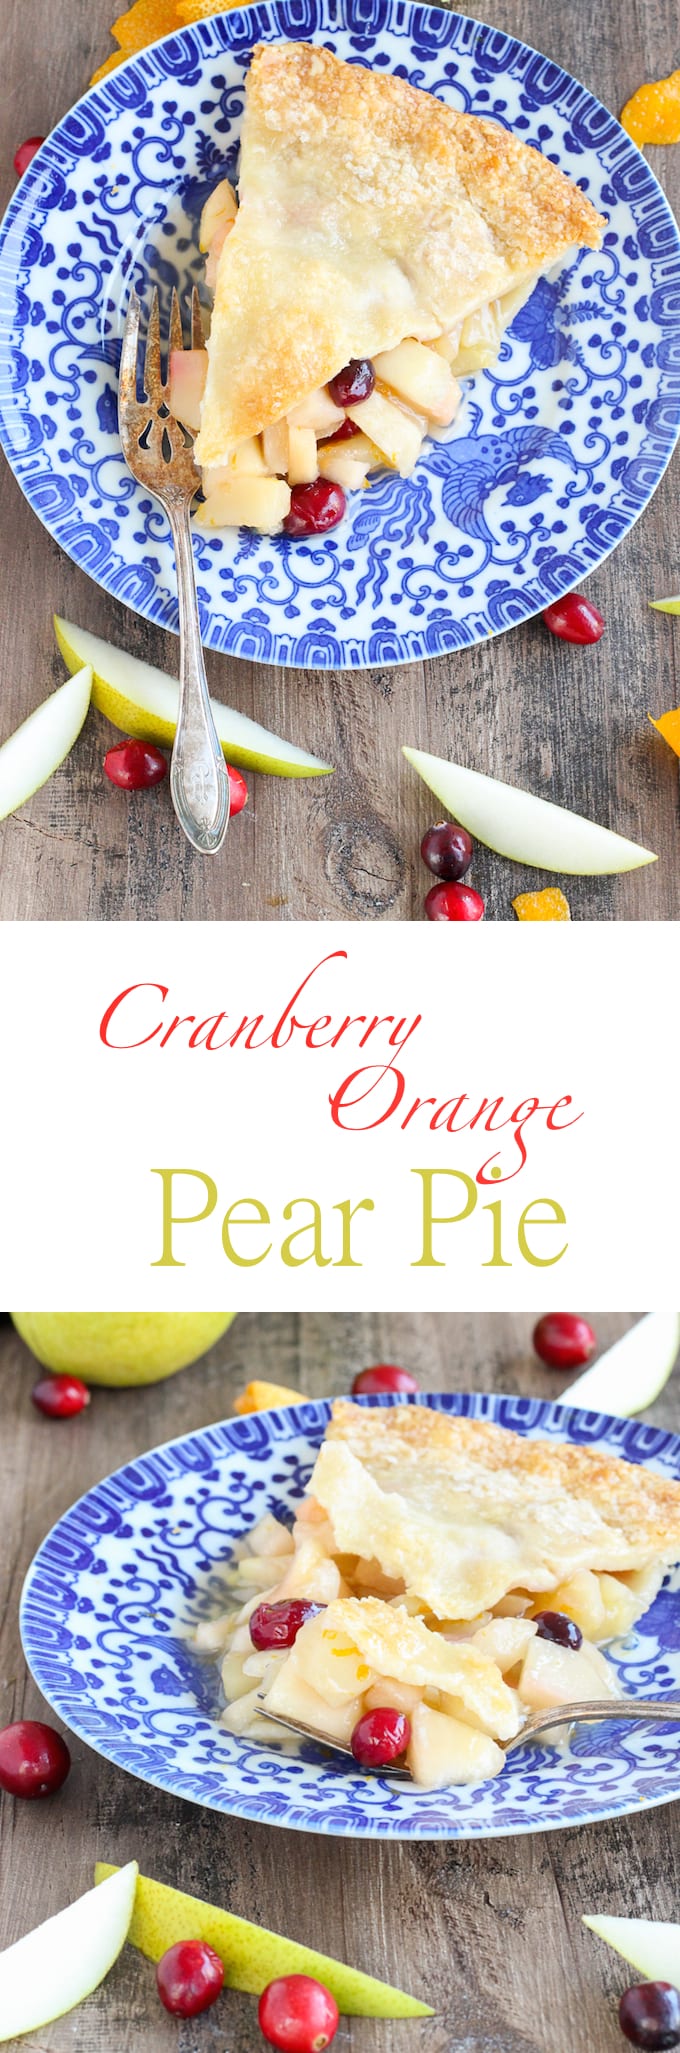 This Cranberry Orange Pear Pie has a sweet brown sugar orange pear filling and is studded with tart cranberries! With fresh orange juice, zest and Grand Marnier, the flavors are absolute heaven! 